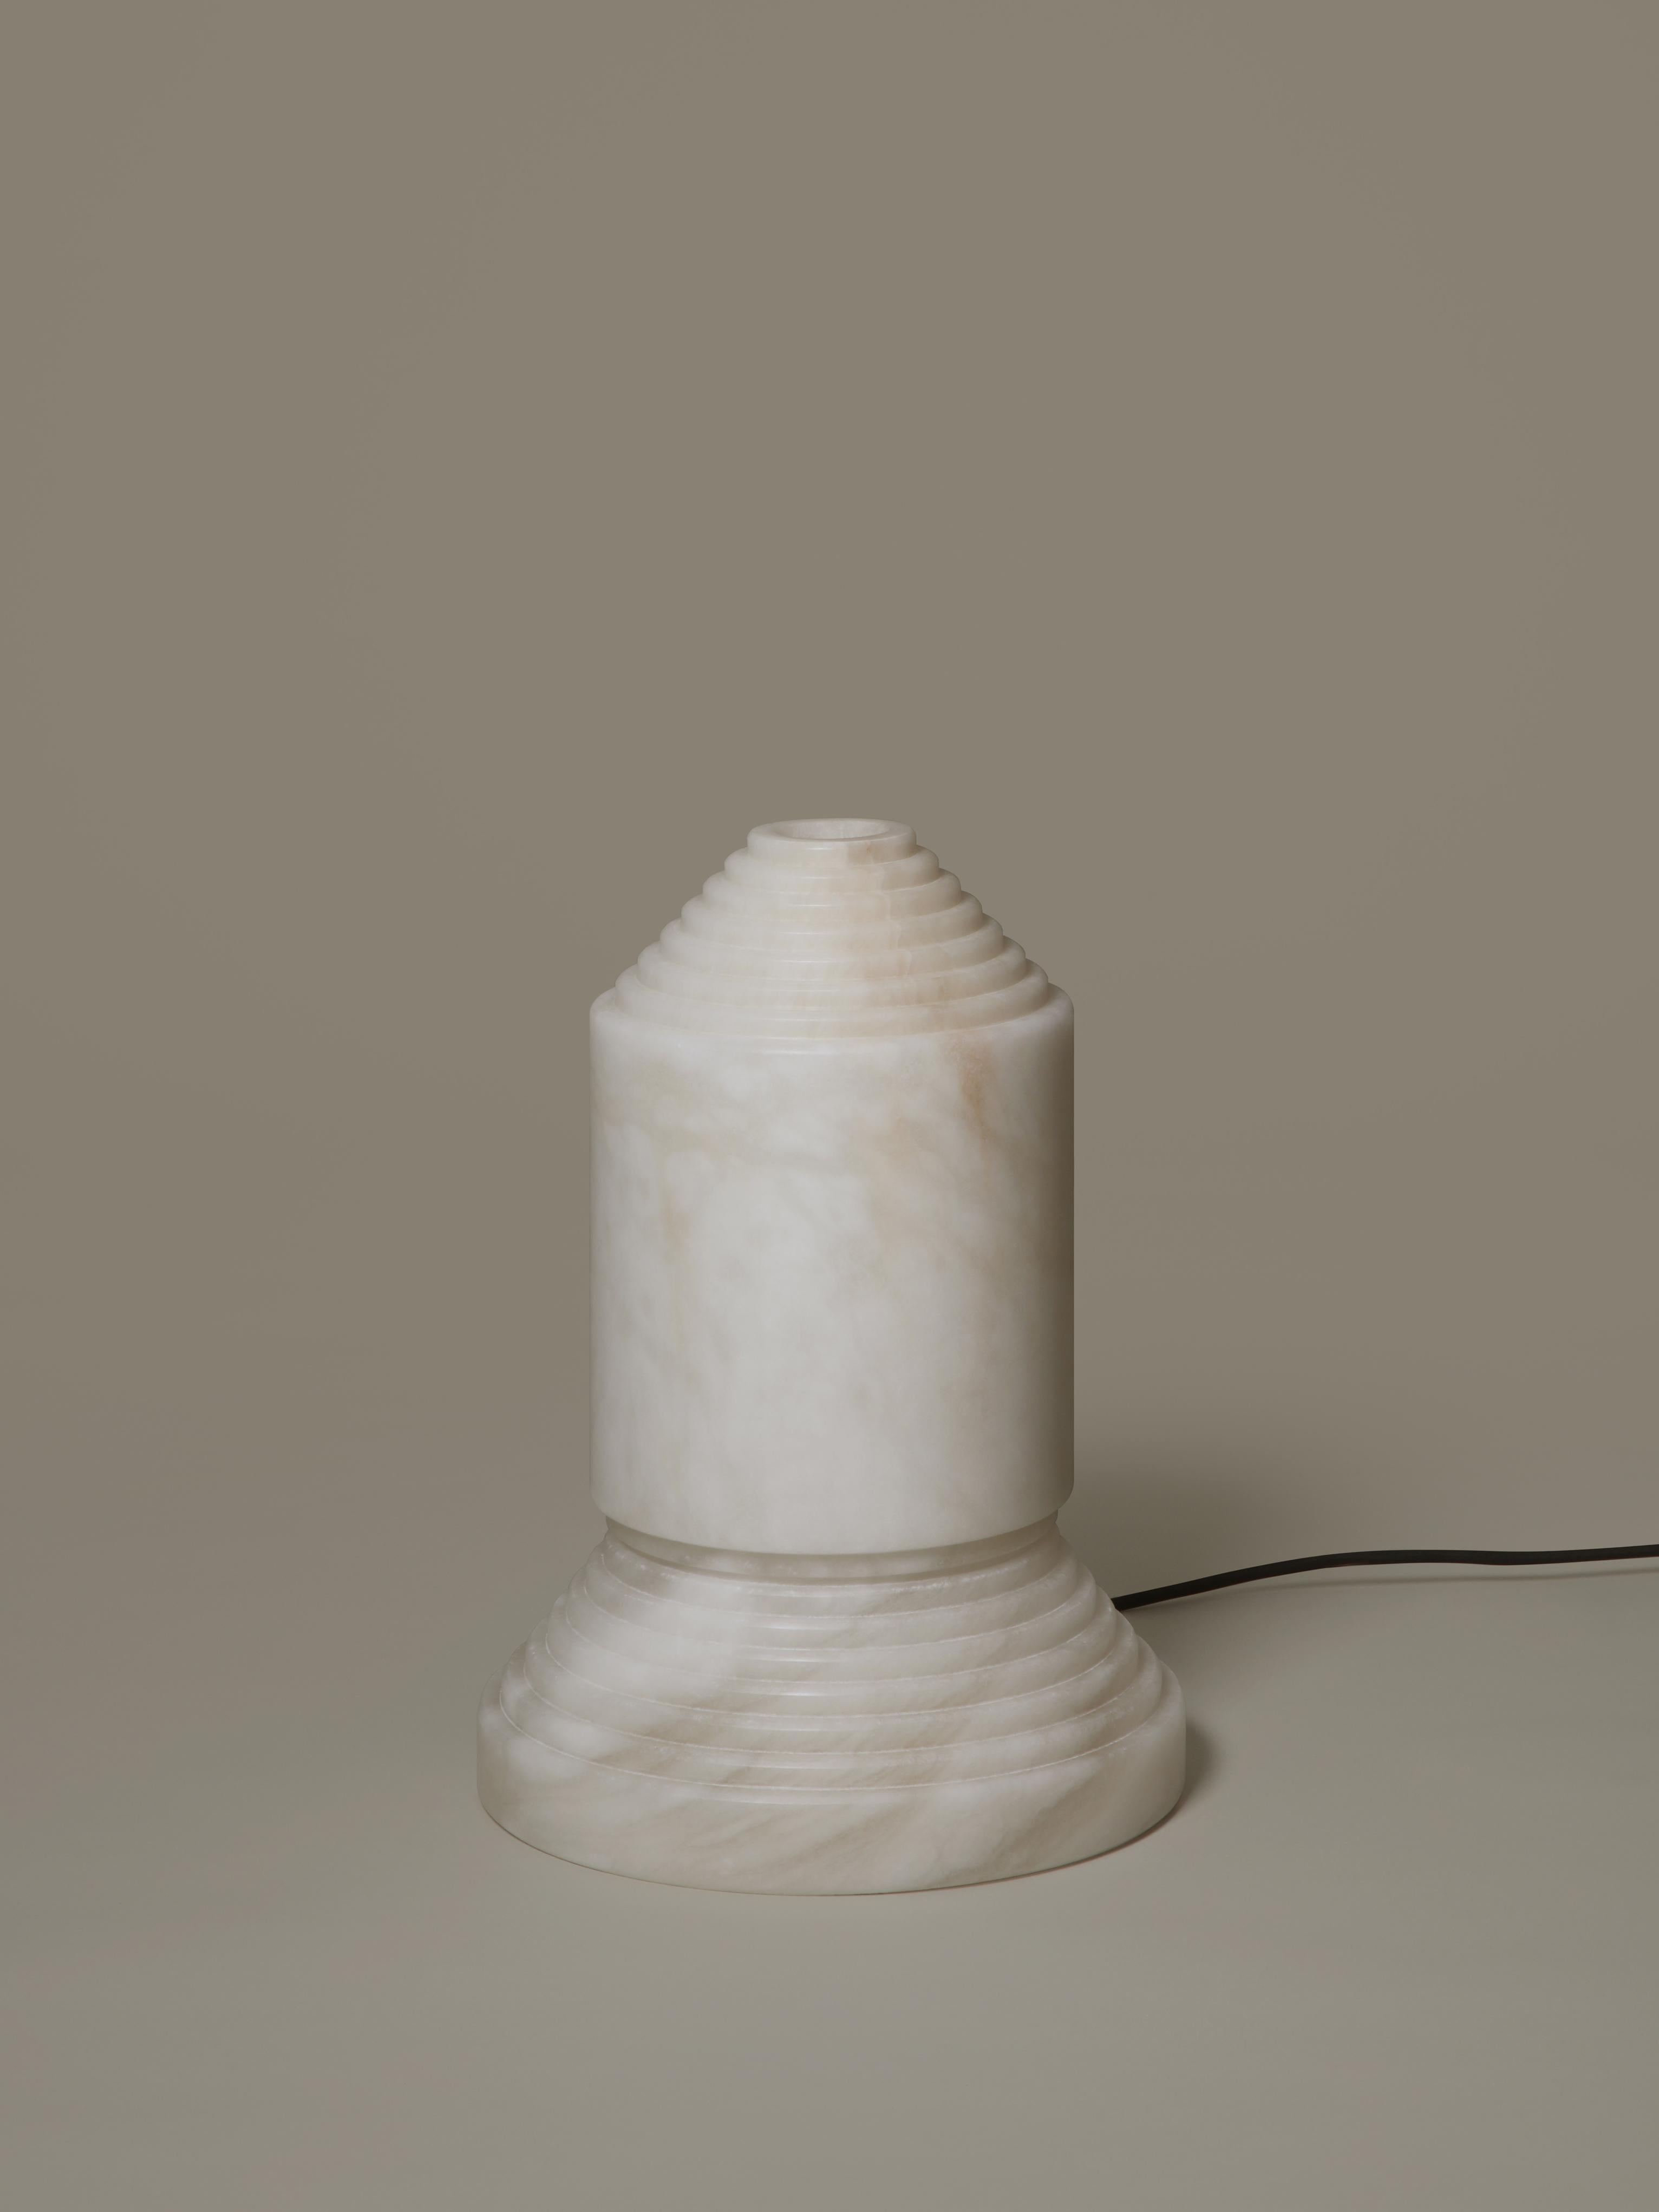 Babel alabaster table lamp by Àngel Jové.
Dimensions: D 30 x H 40.5 cm.
Materials: Alabaster.

Babel, whose name comes from the biblical story of the unfinished tower, is both a sturdy sculpture and a lamp apt for night-time intimacy. The use of